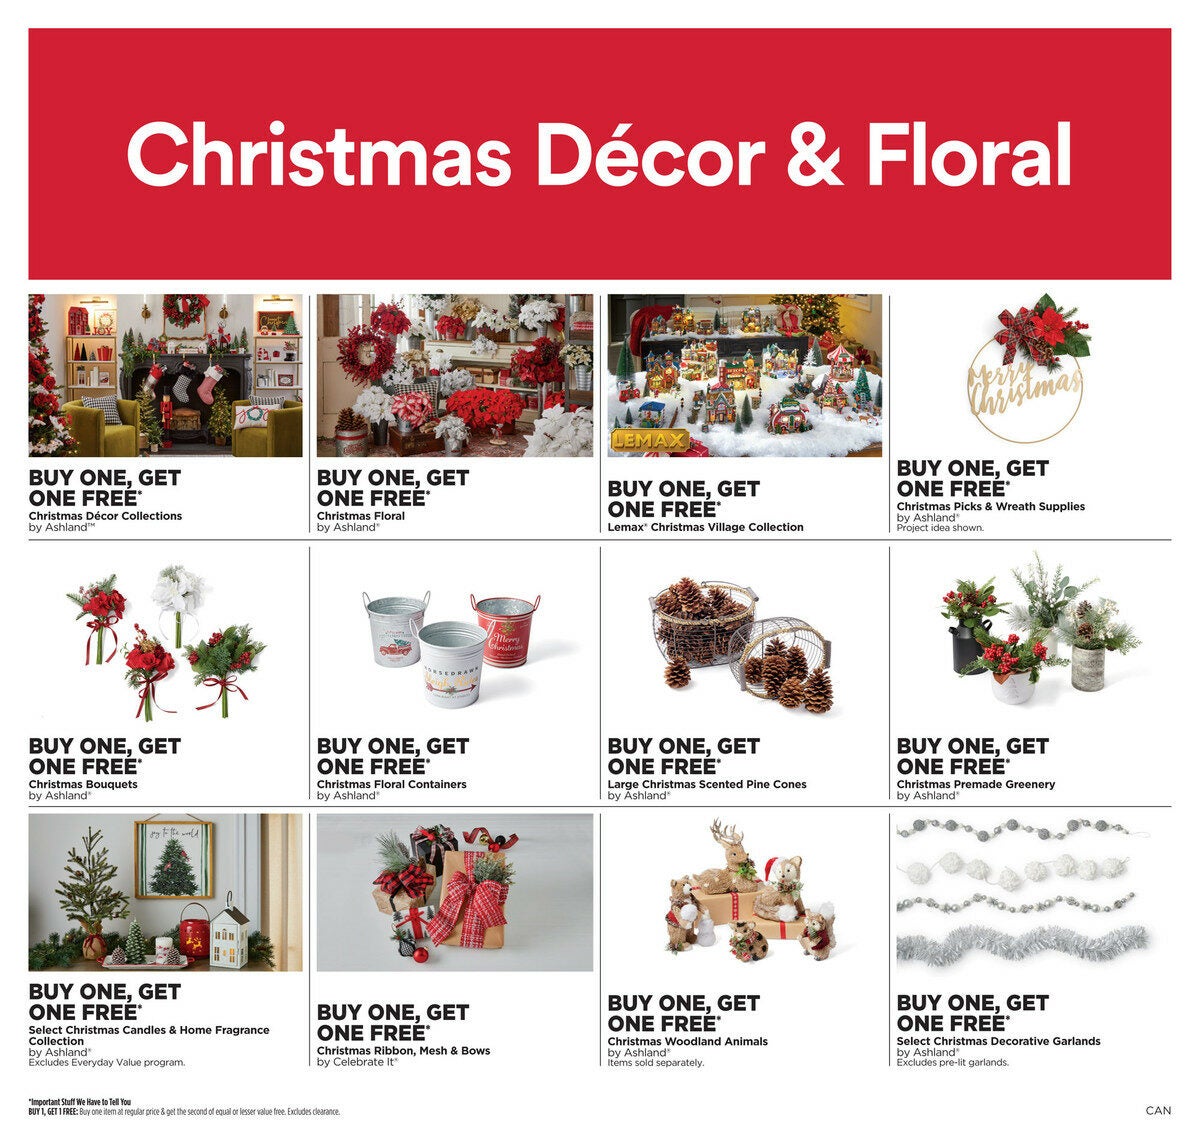 Michaels Weekly Flyer - Weekly Deals - The Great Big Tree Spree